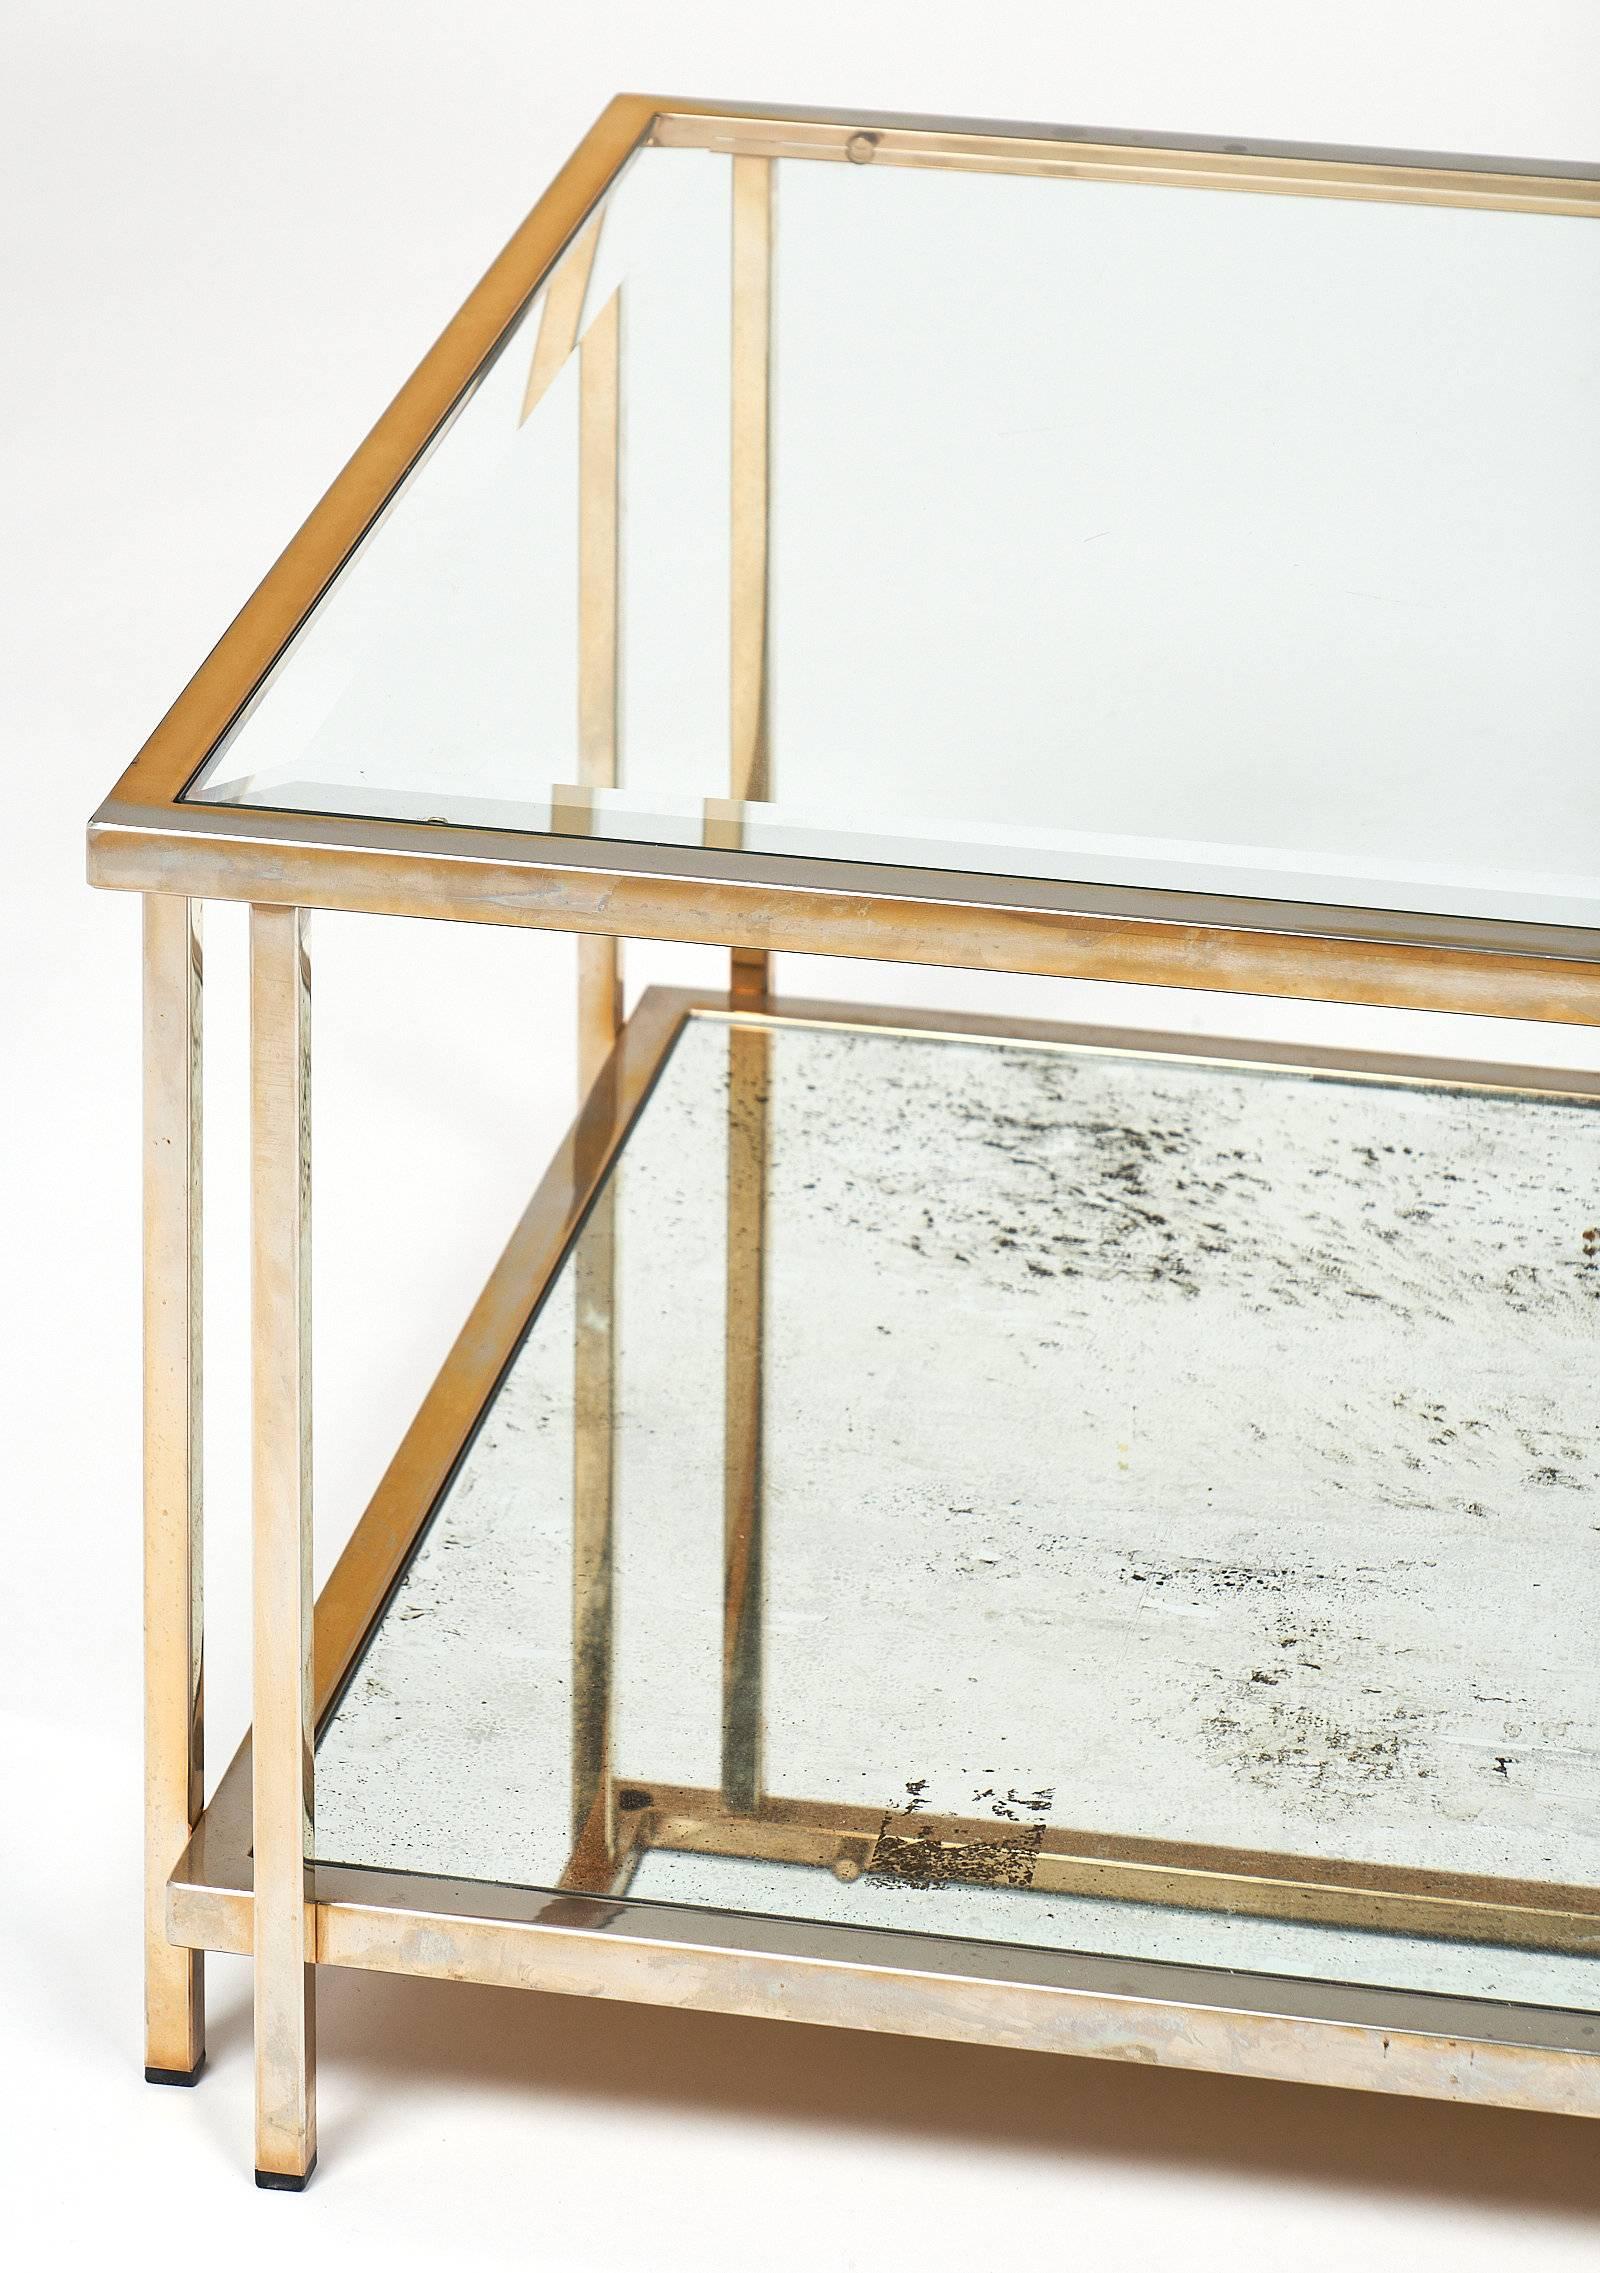 brass and glass coffee table vintage